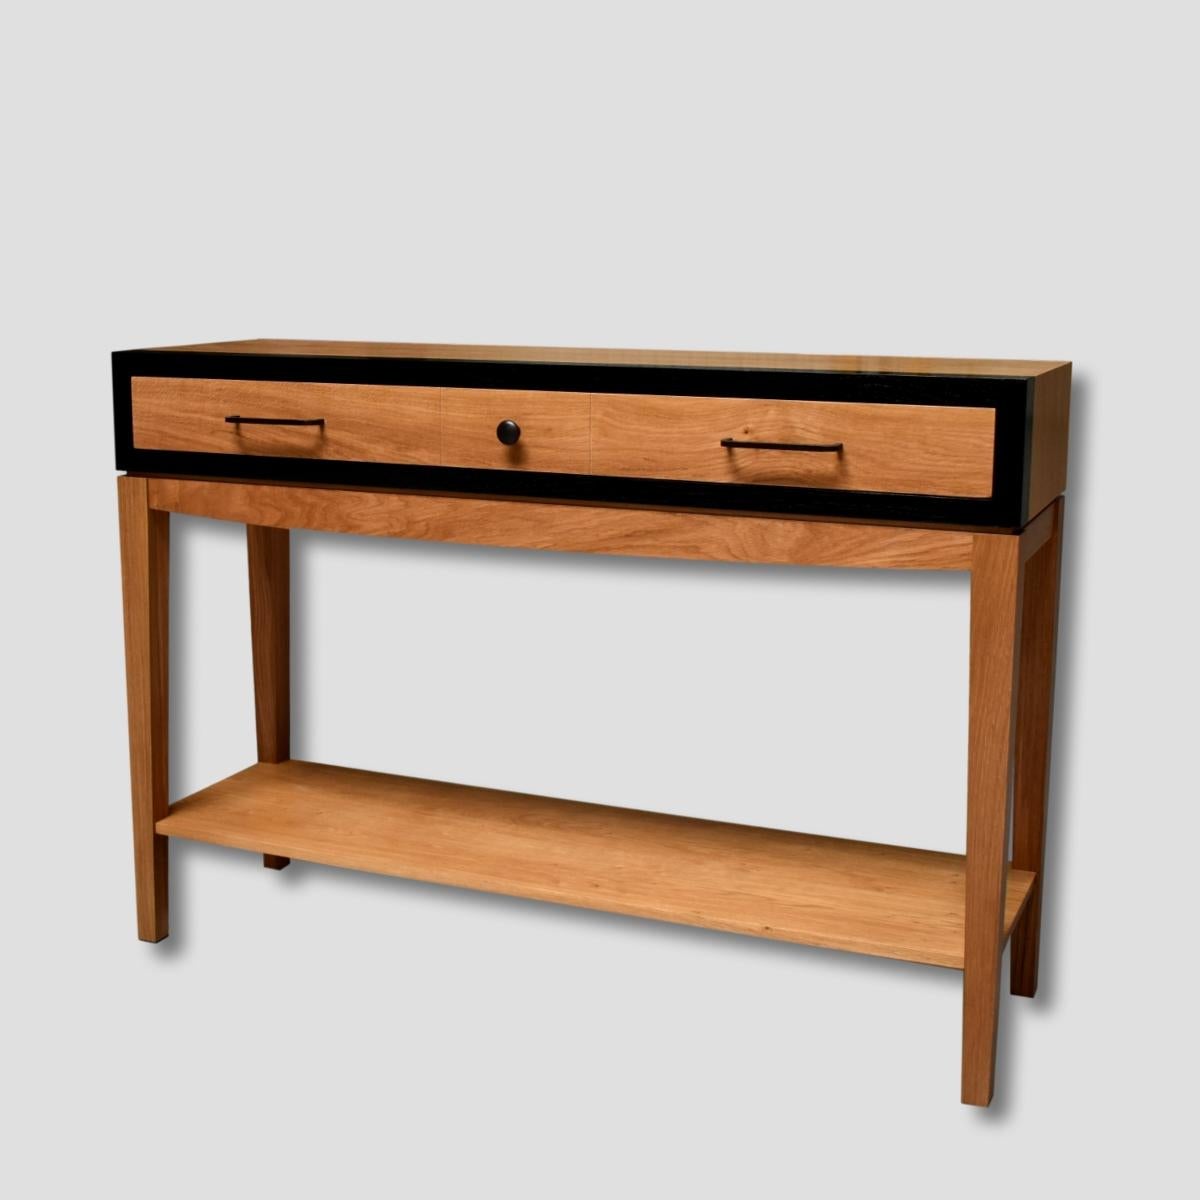 Hand-Crafted Modern Console Table in French Oak with 1 Drawer by Designer C. Lecomte For Sale